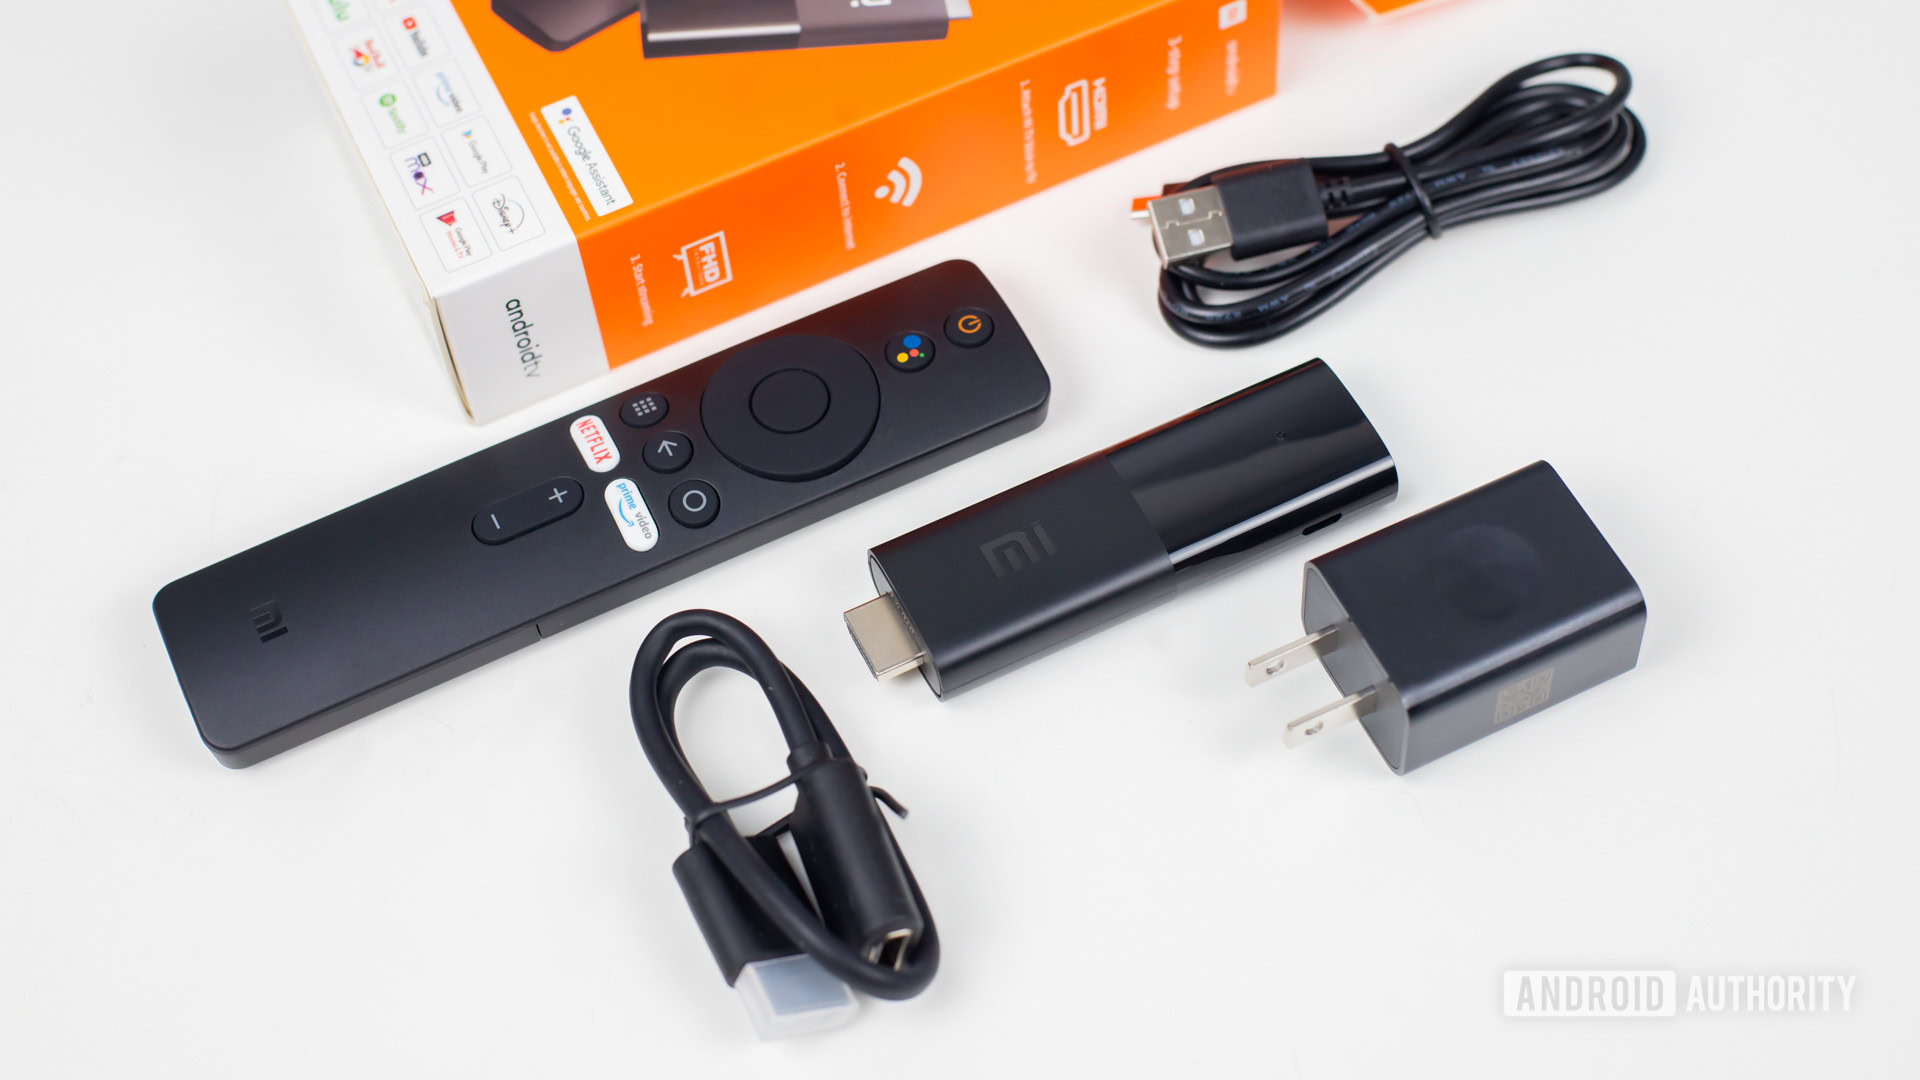 Xiaomi TV Stick 4K review: Small step for streaming, giant leap for Xiaomi